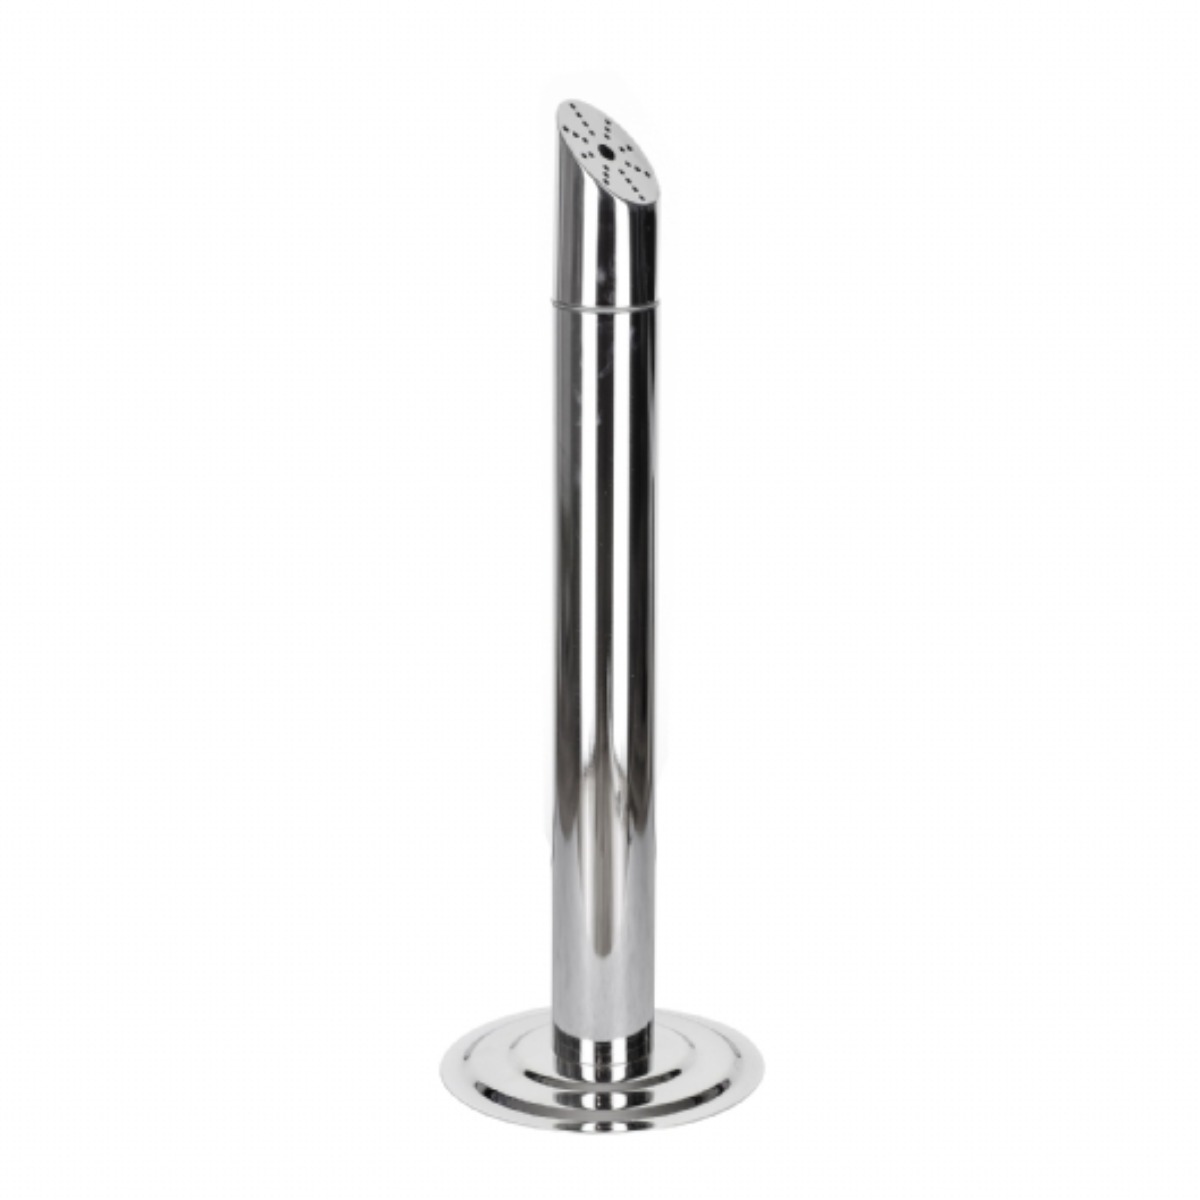 AB-101 Outdoor Ashtray Stainless